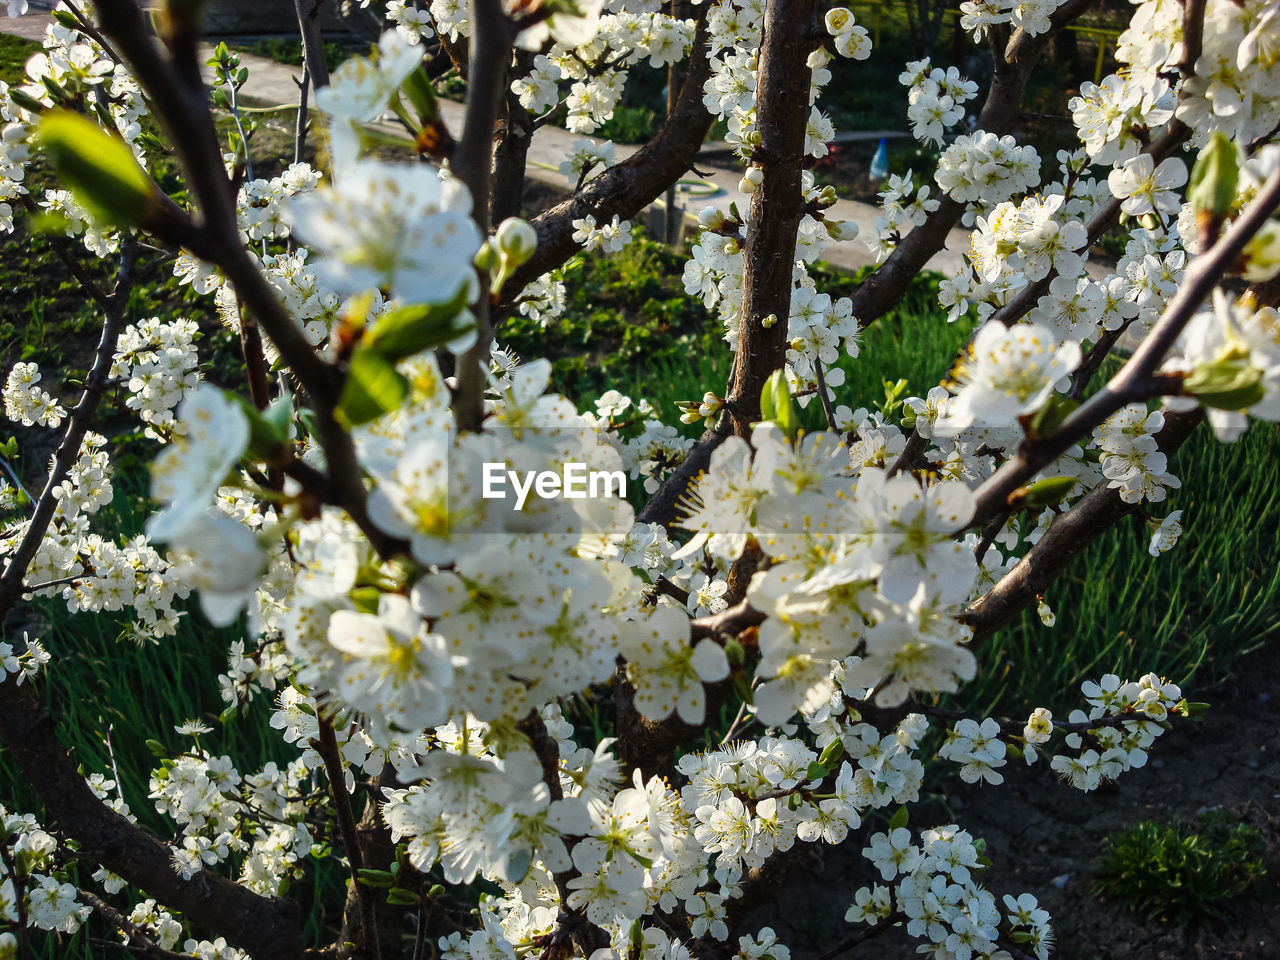 CLOSE-UP OF WHITE CHERRY BLOSSOM TREE IN SPRING